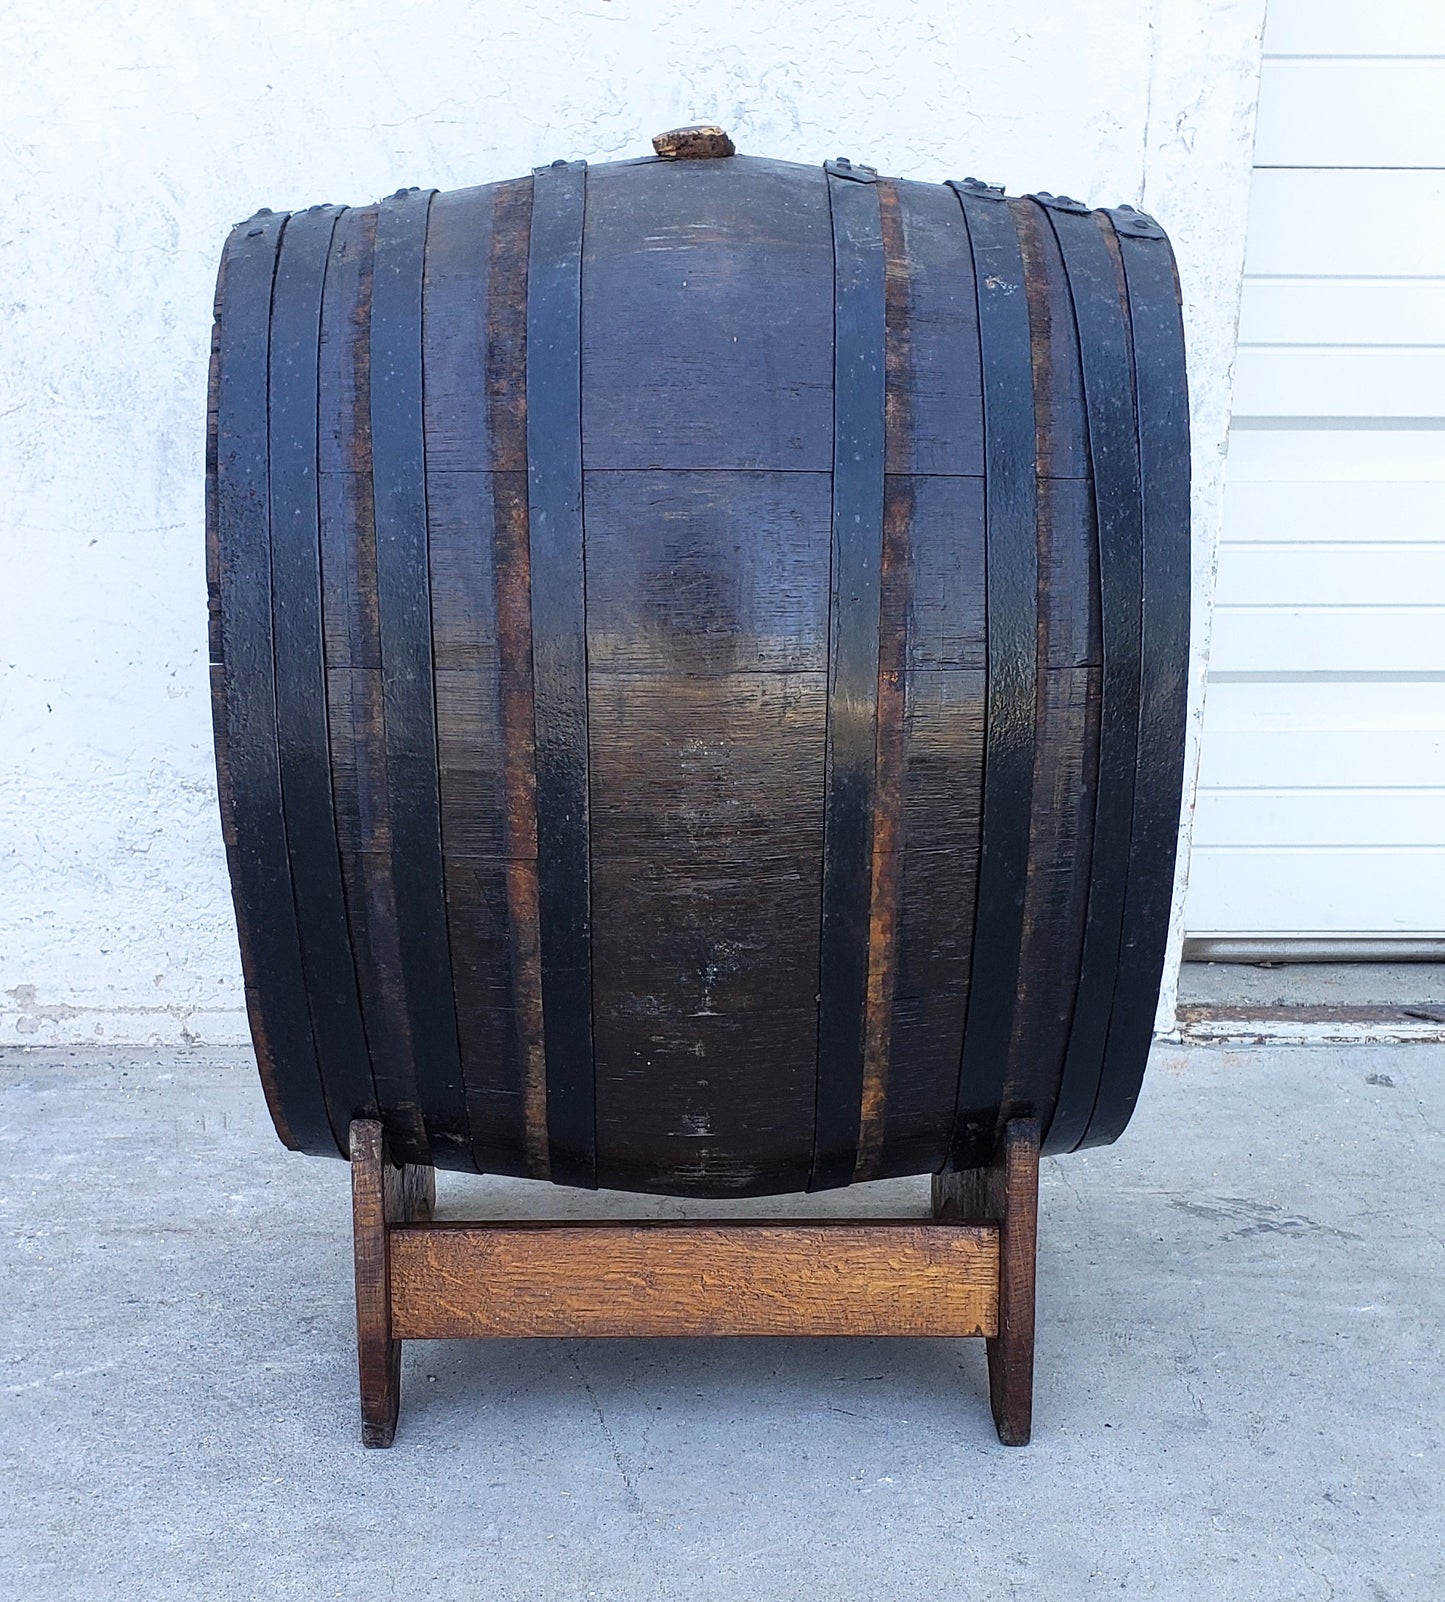 Small Wine Barrel with "Marc" Label